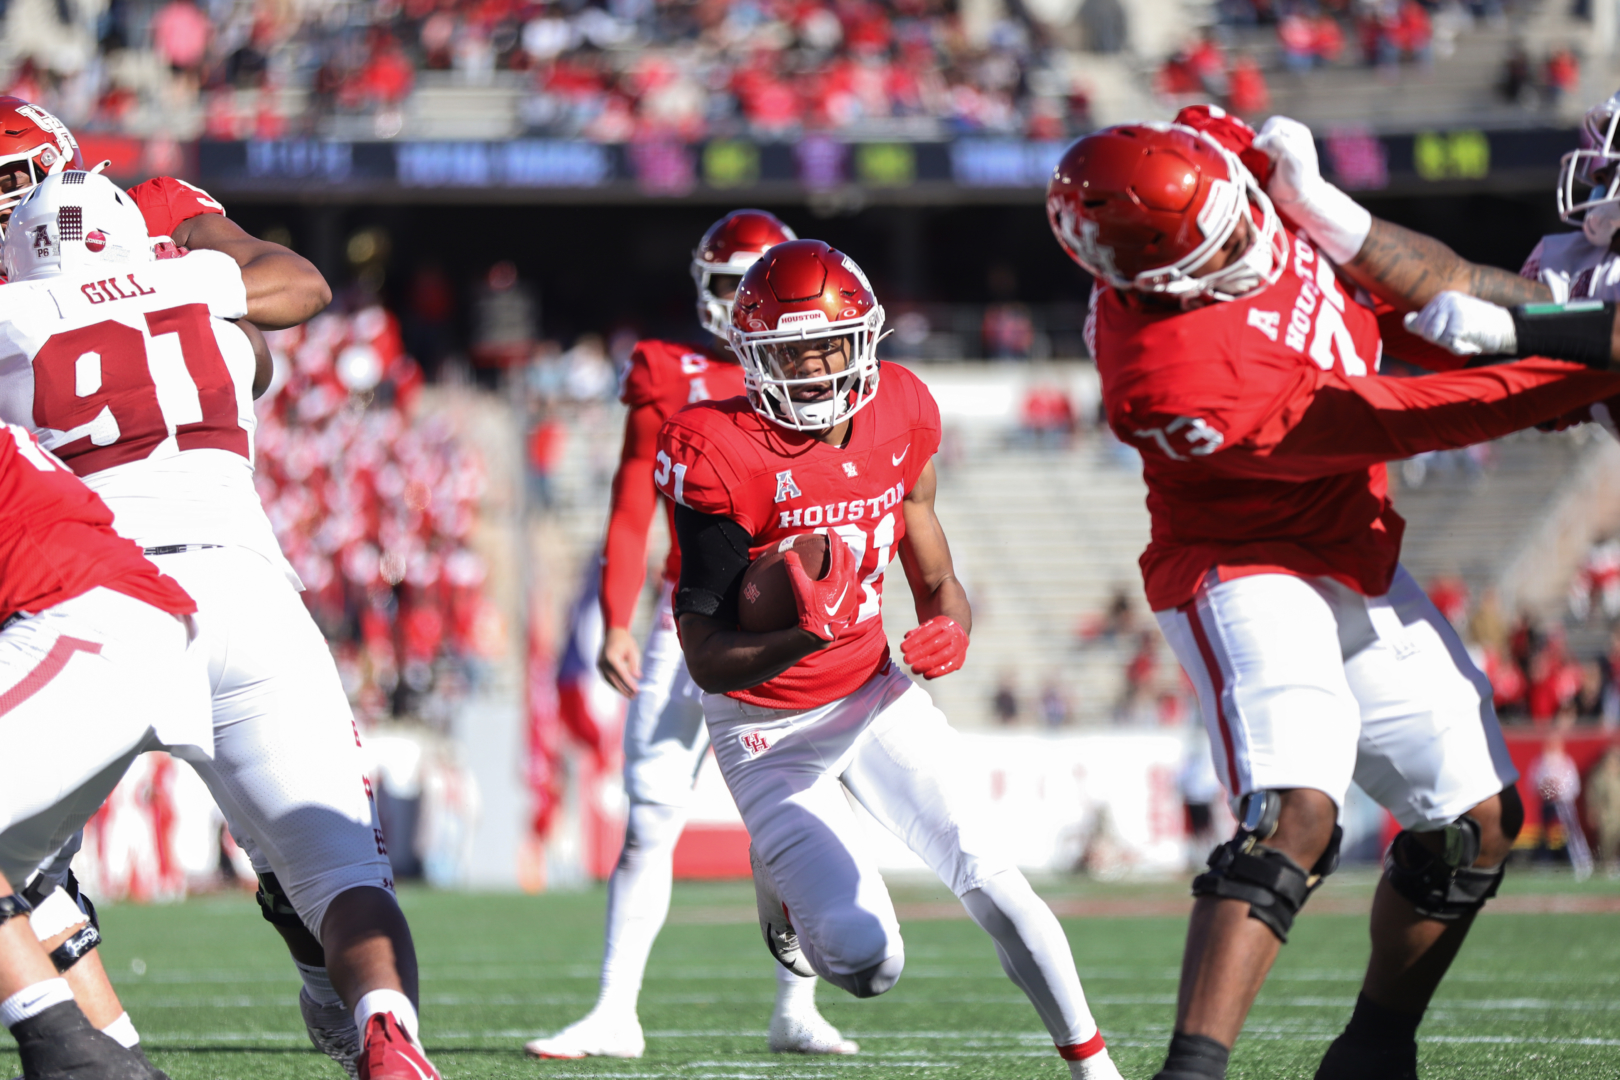 Redshirt freshman running back Stacy Sneed had another big game on the ground, rushing for a career-high 143 yards and two touchdowns for UH football in the win over Temple on Saturday afternoon at TDECU Stadium. | Sean Thomas/The Cougar